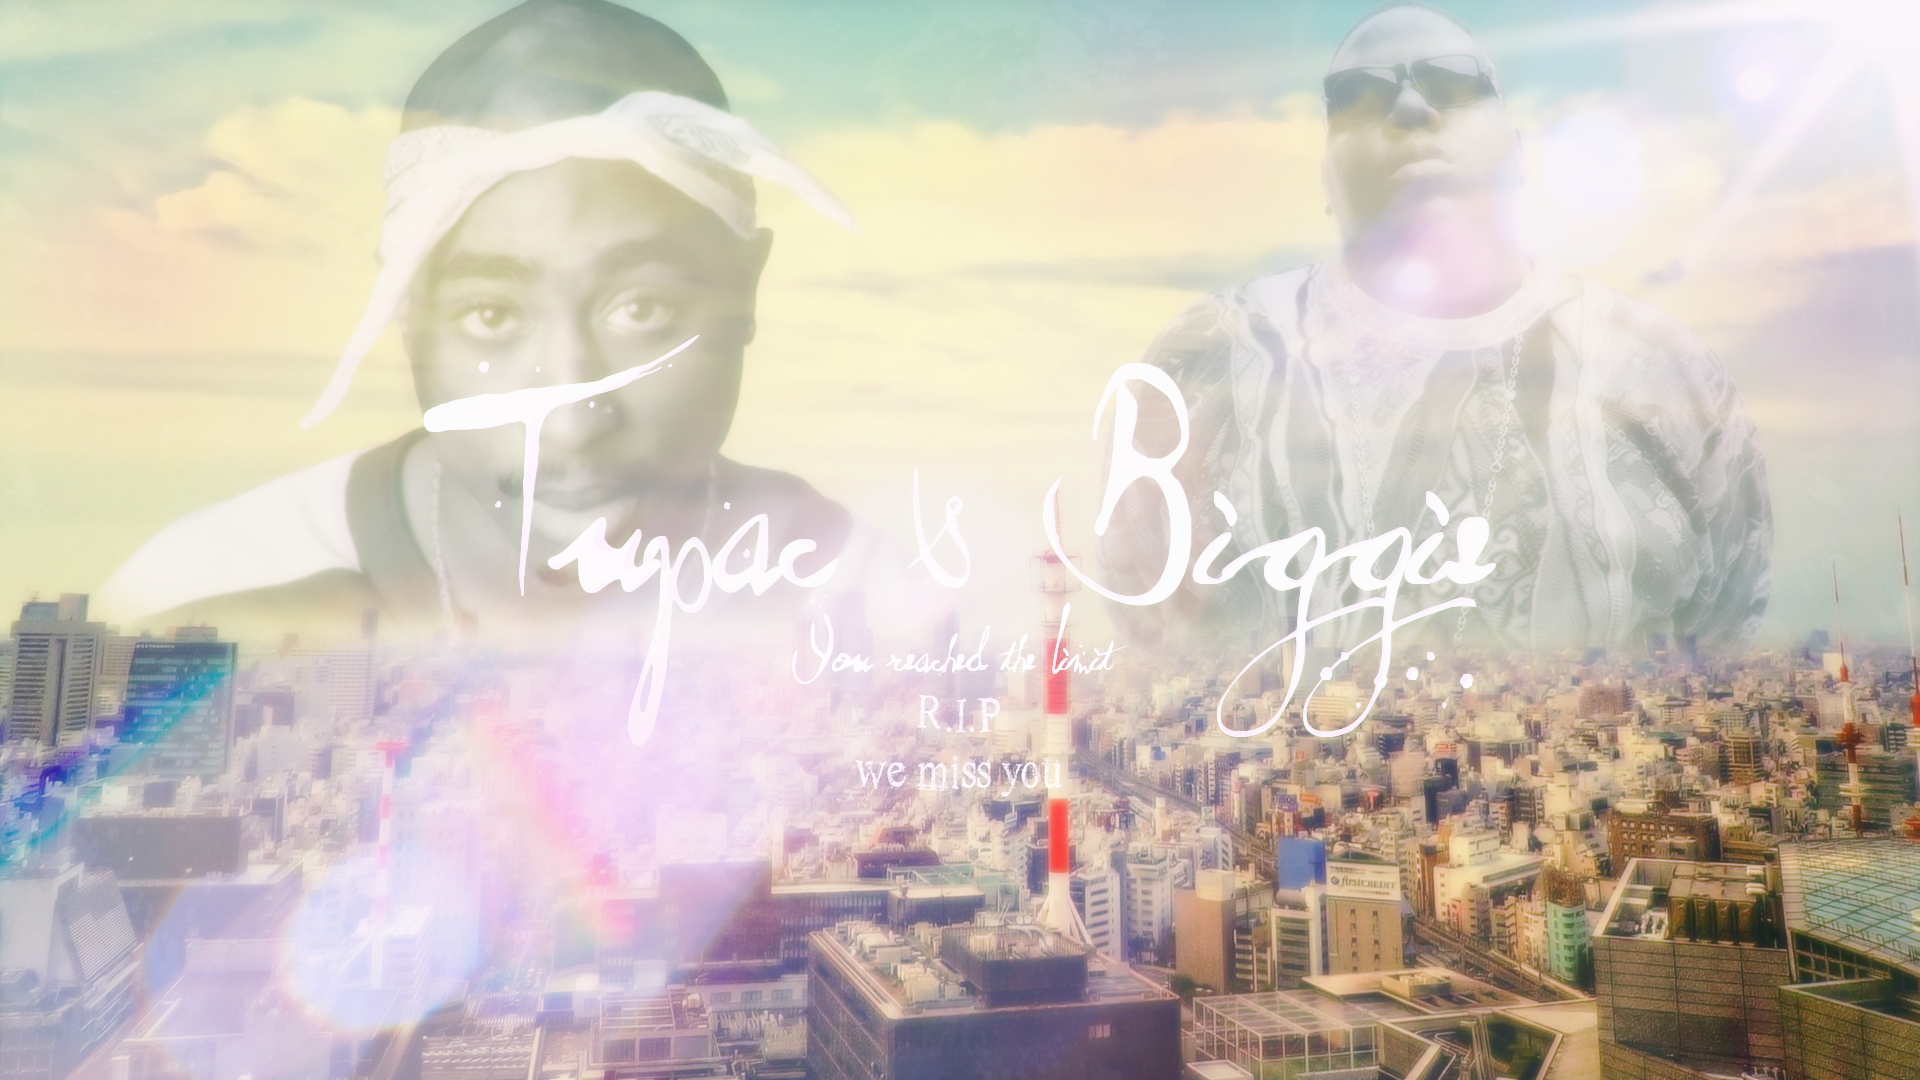 Tupac and Biggie wallpaper by IndicaDesigns 1920x1080